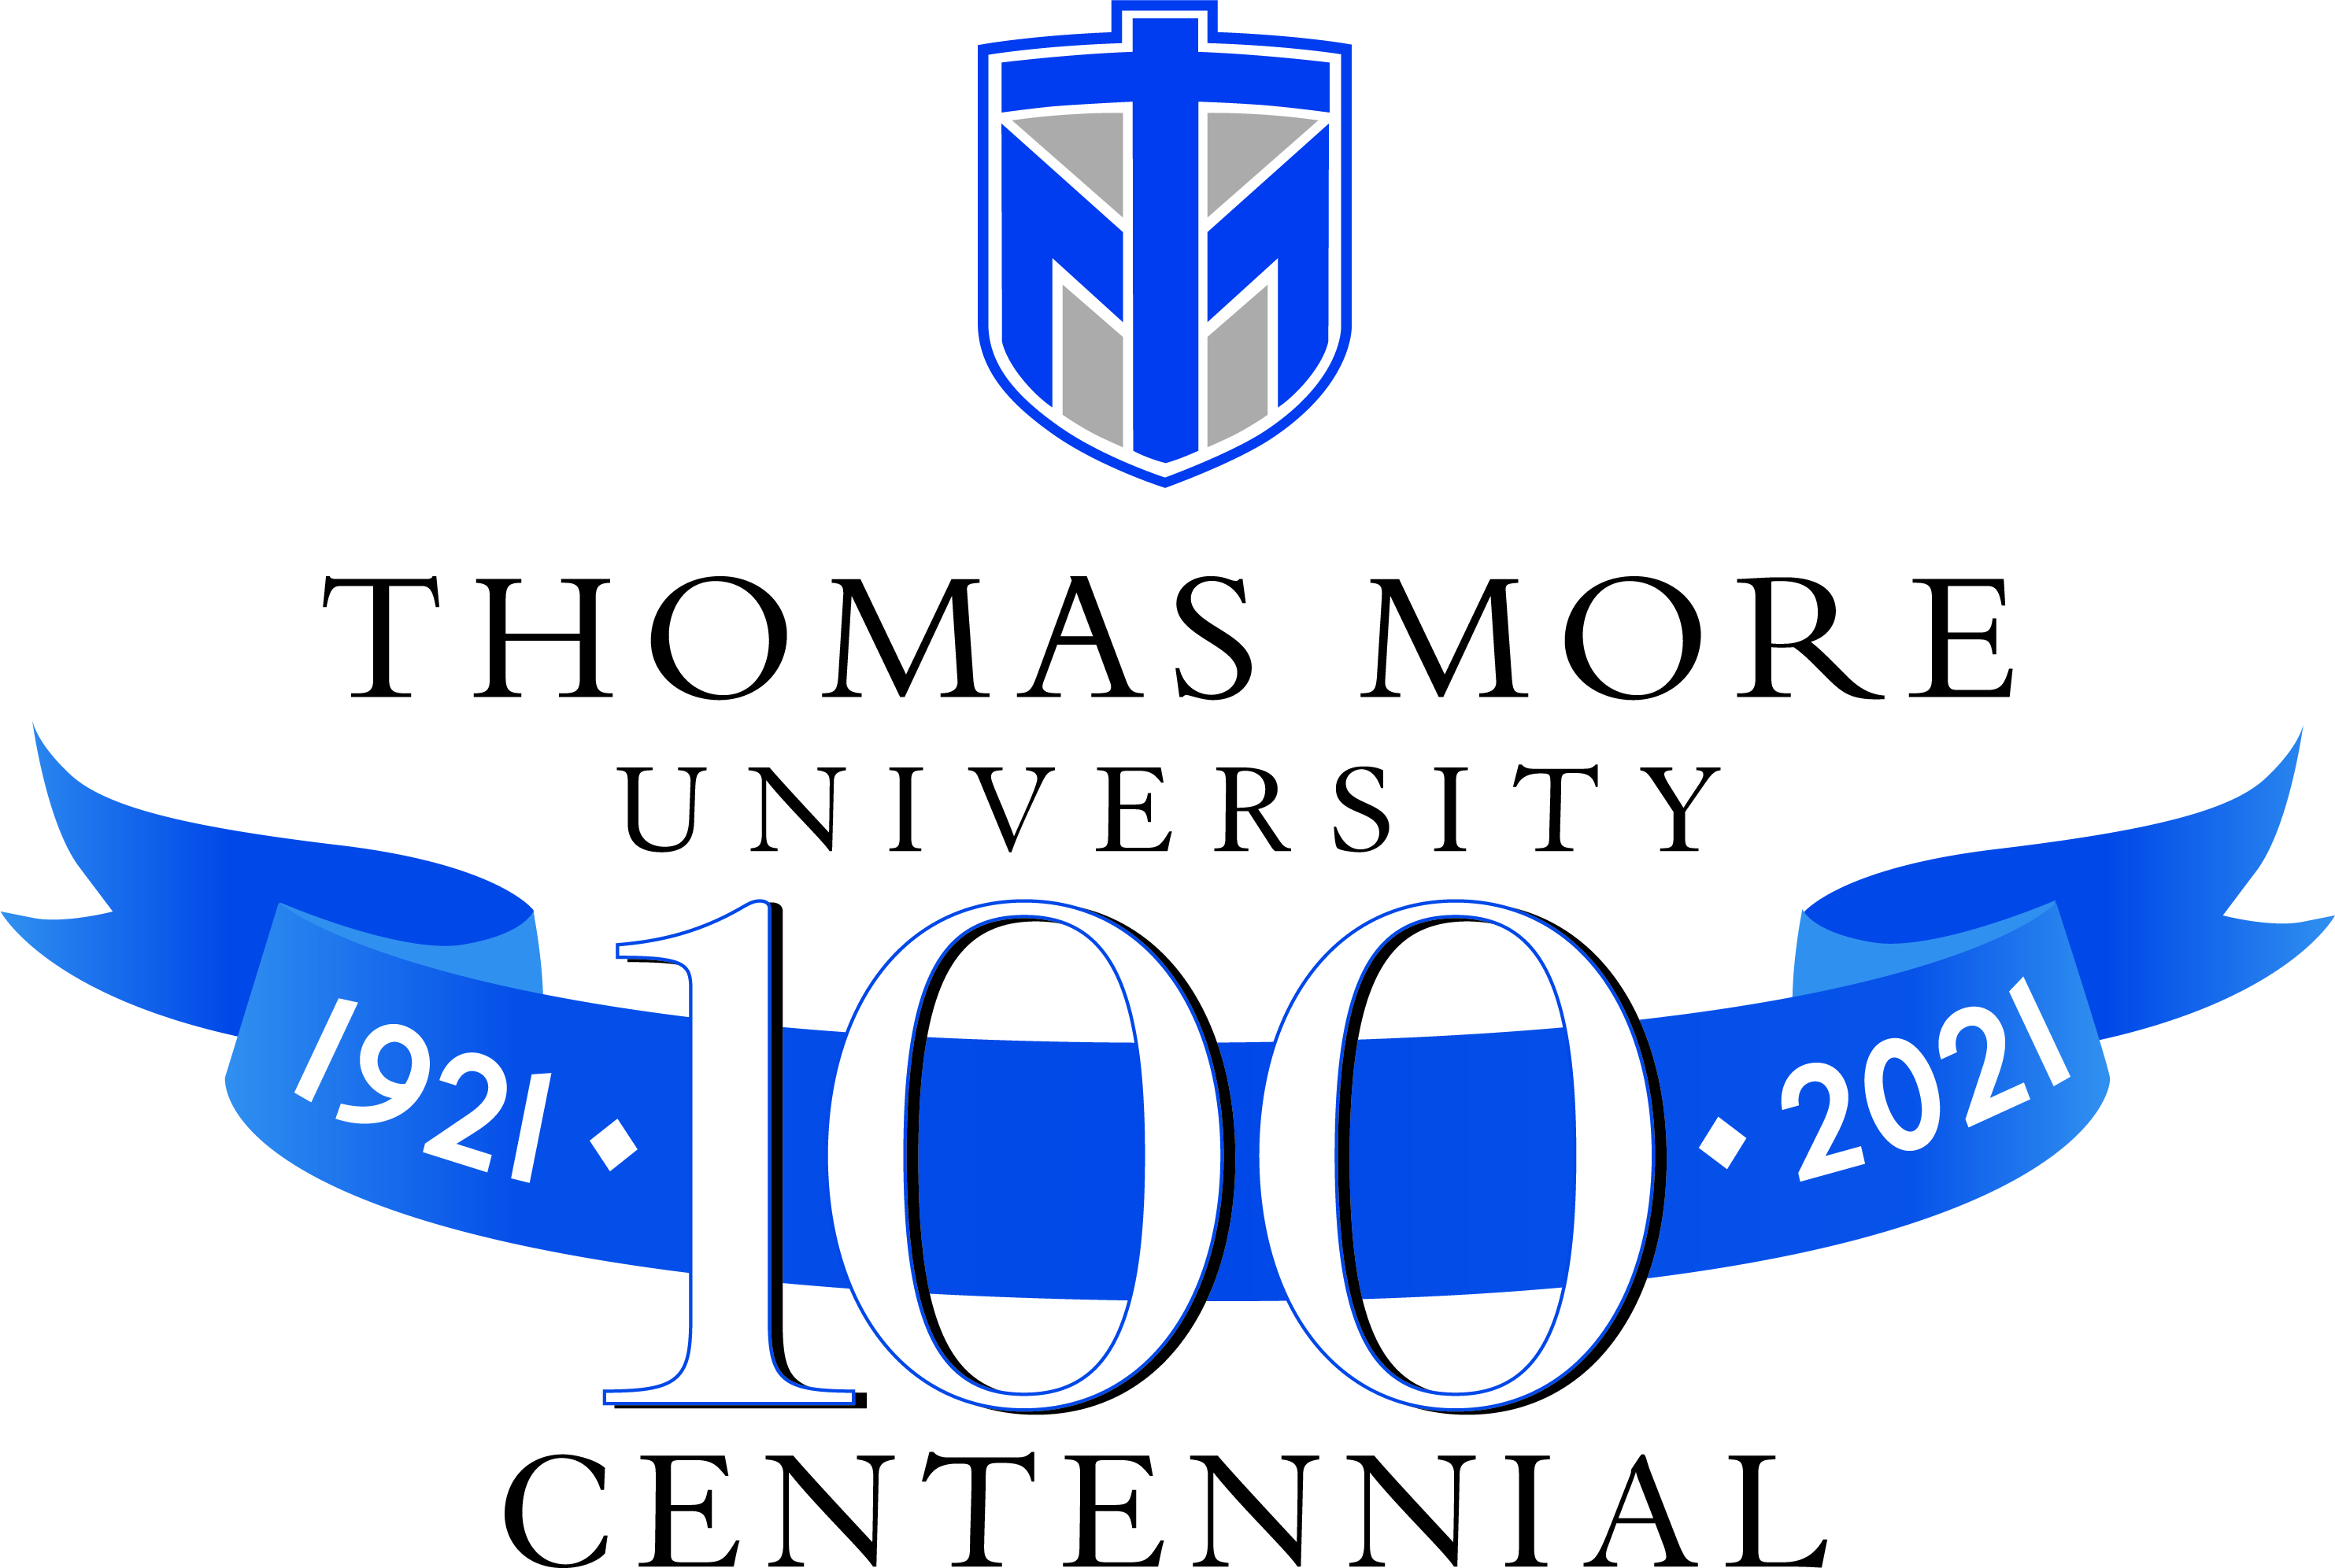 Thomas More University - 100th Anniversary 1921 – 2021 - Centennial Celebration. Thomas More University’s Centennial Celebration aimed at advancing the University physically, academically, and spiritually.  With the goal of establishing the University as the region’s premier Catholic education institution.  It’s time for More.  | #ThomasMore #ThomasMore100 #SaintsServe